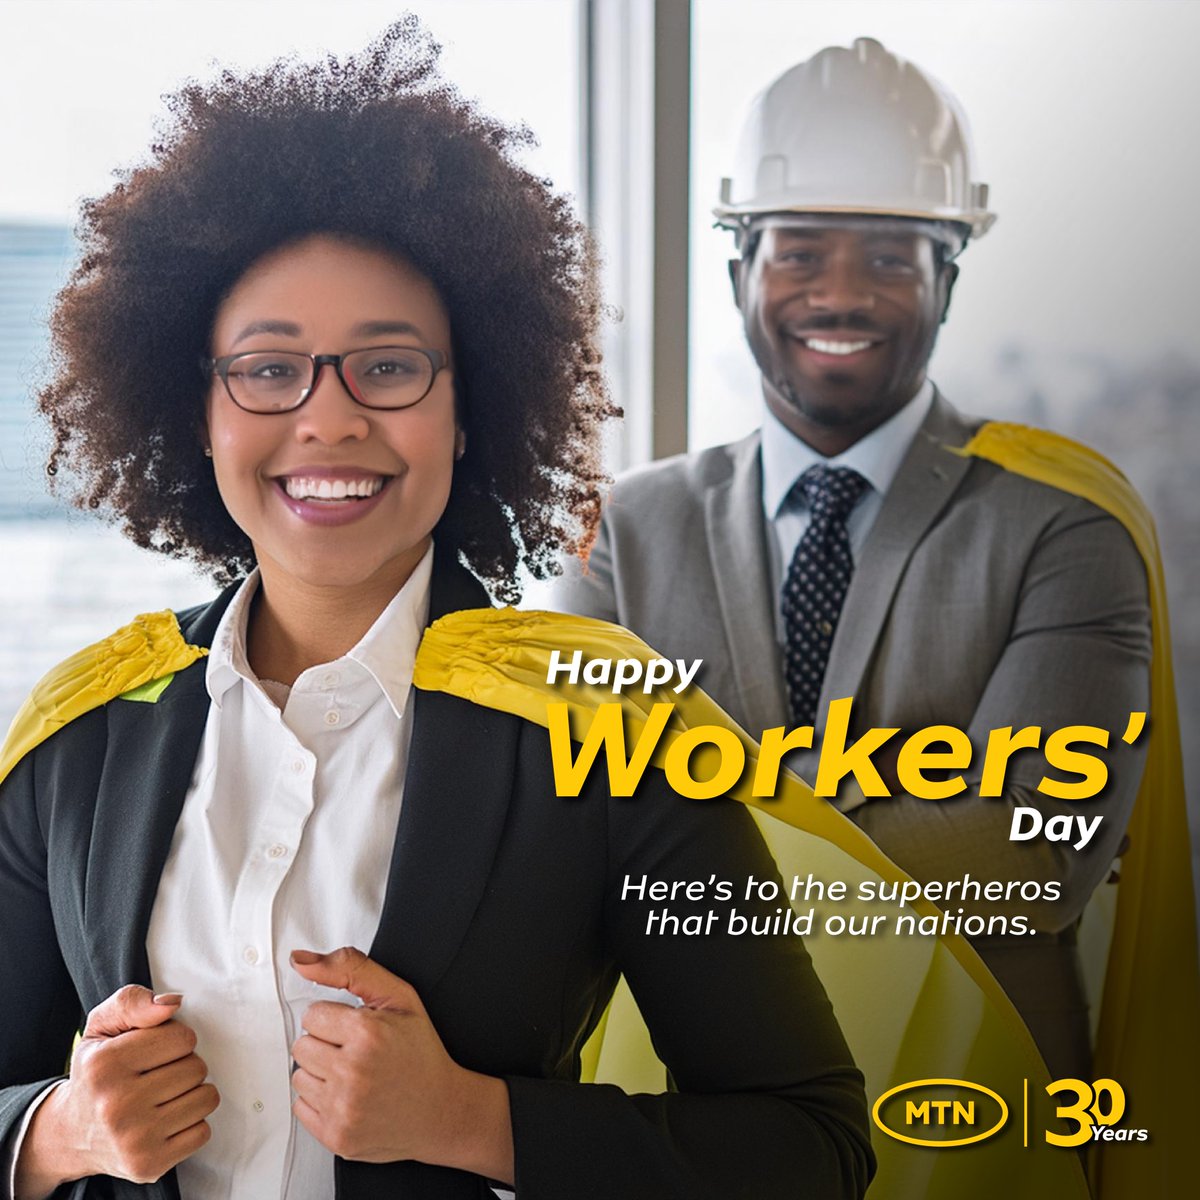 📣Shoutout to everyday heroes—YOU! From number crunchers and life savers to community builders, your hard work doesn't go unnoticed. Today, we honour your dedication to making the world better. Happy Workers' Day! 🌟 #DoingGoodTogether